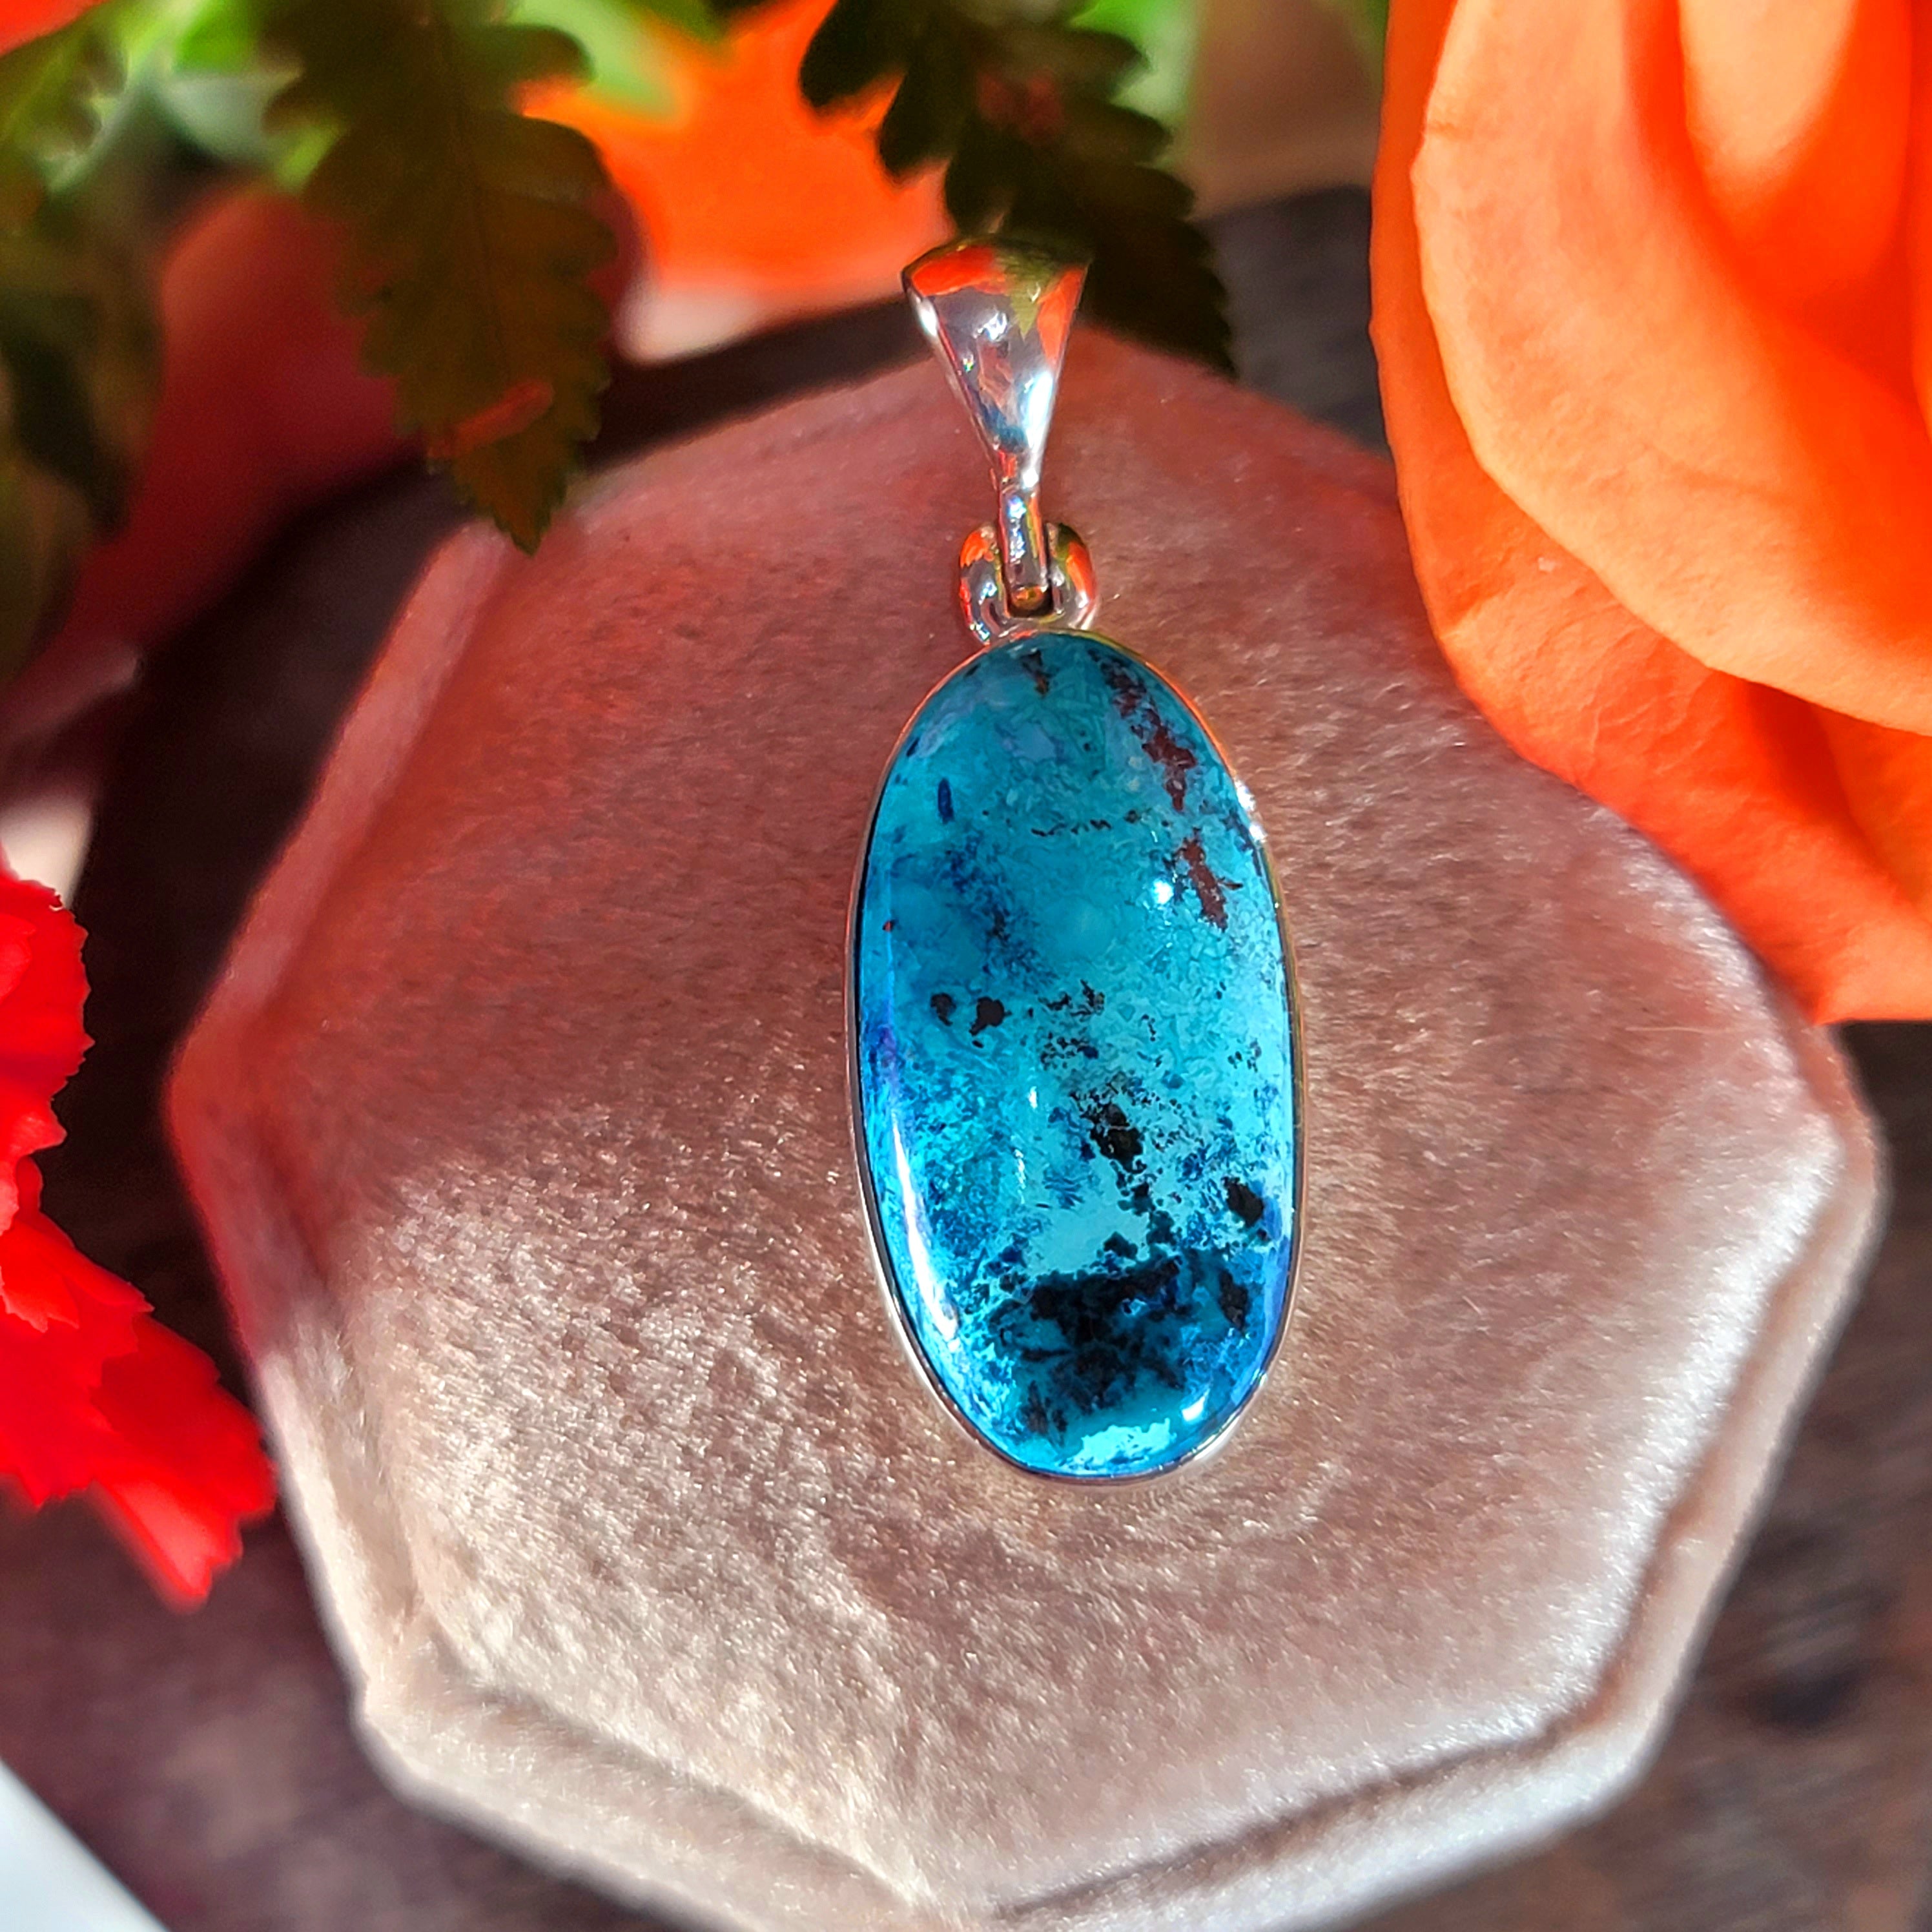 Shattuckite & Chrysocolla Pendant .925 Silver for Goddess Energy, Peaceful Communication and Truth